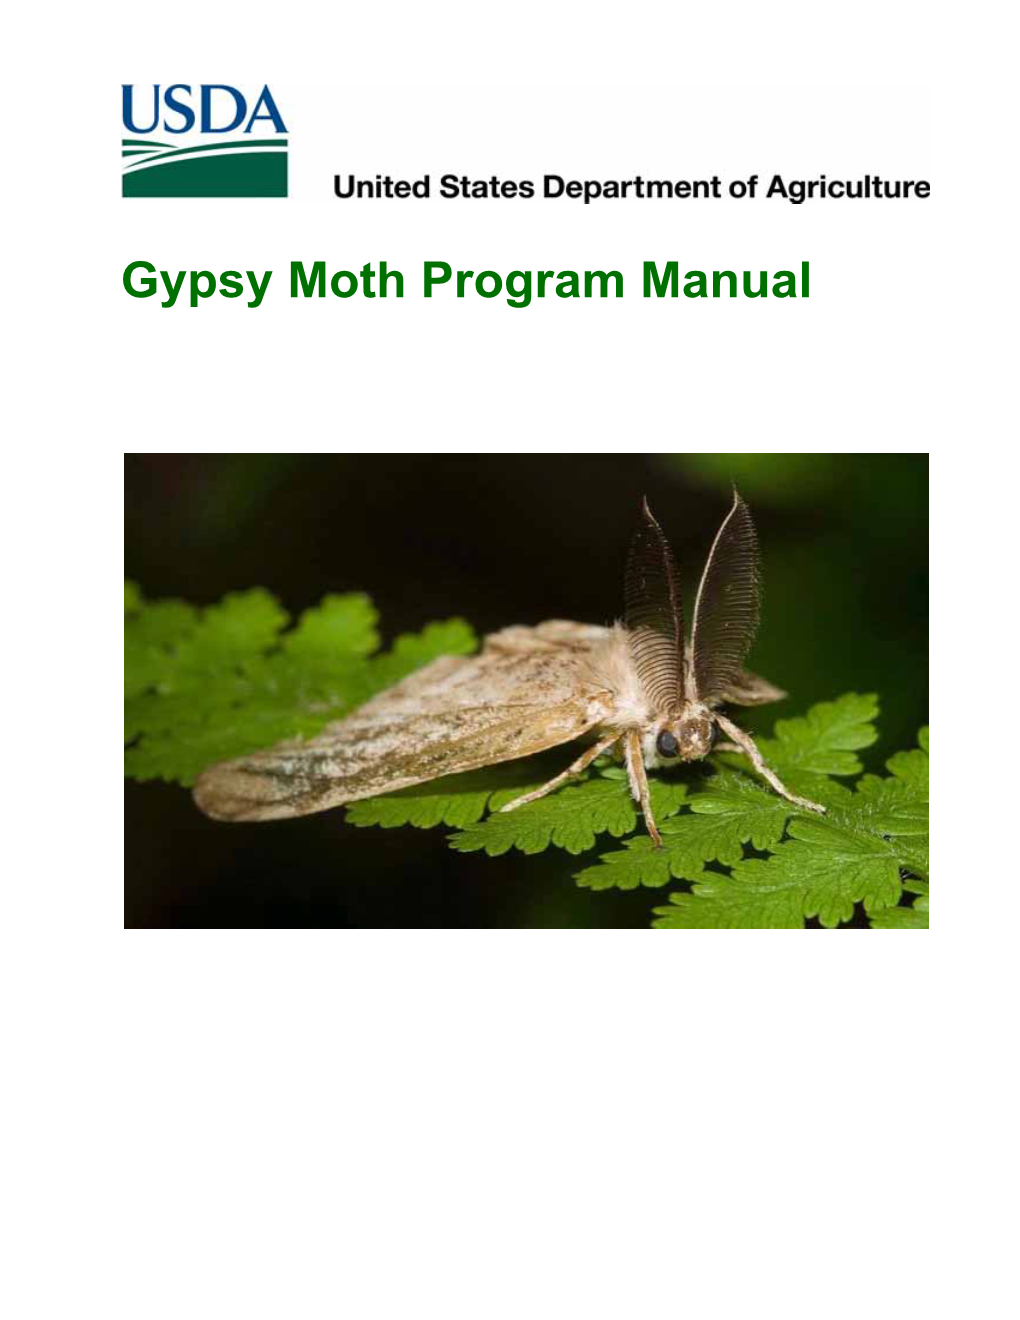 Gypsy Moth Program Manual Some Processes, Equipment, and Materials Described in This Manual May Be Patented